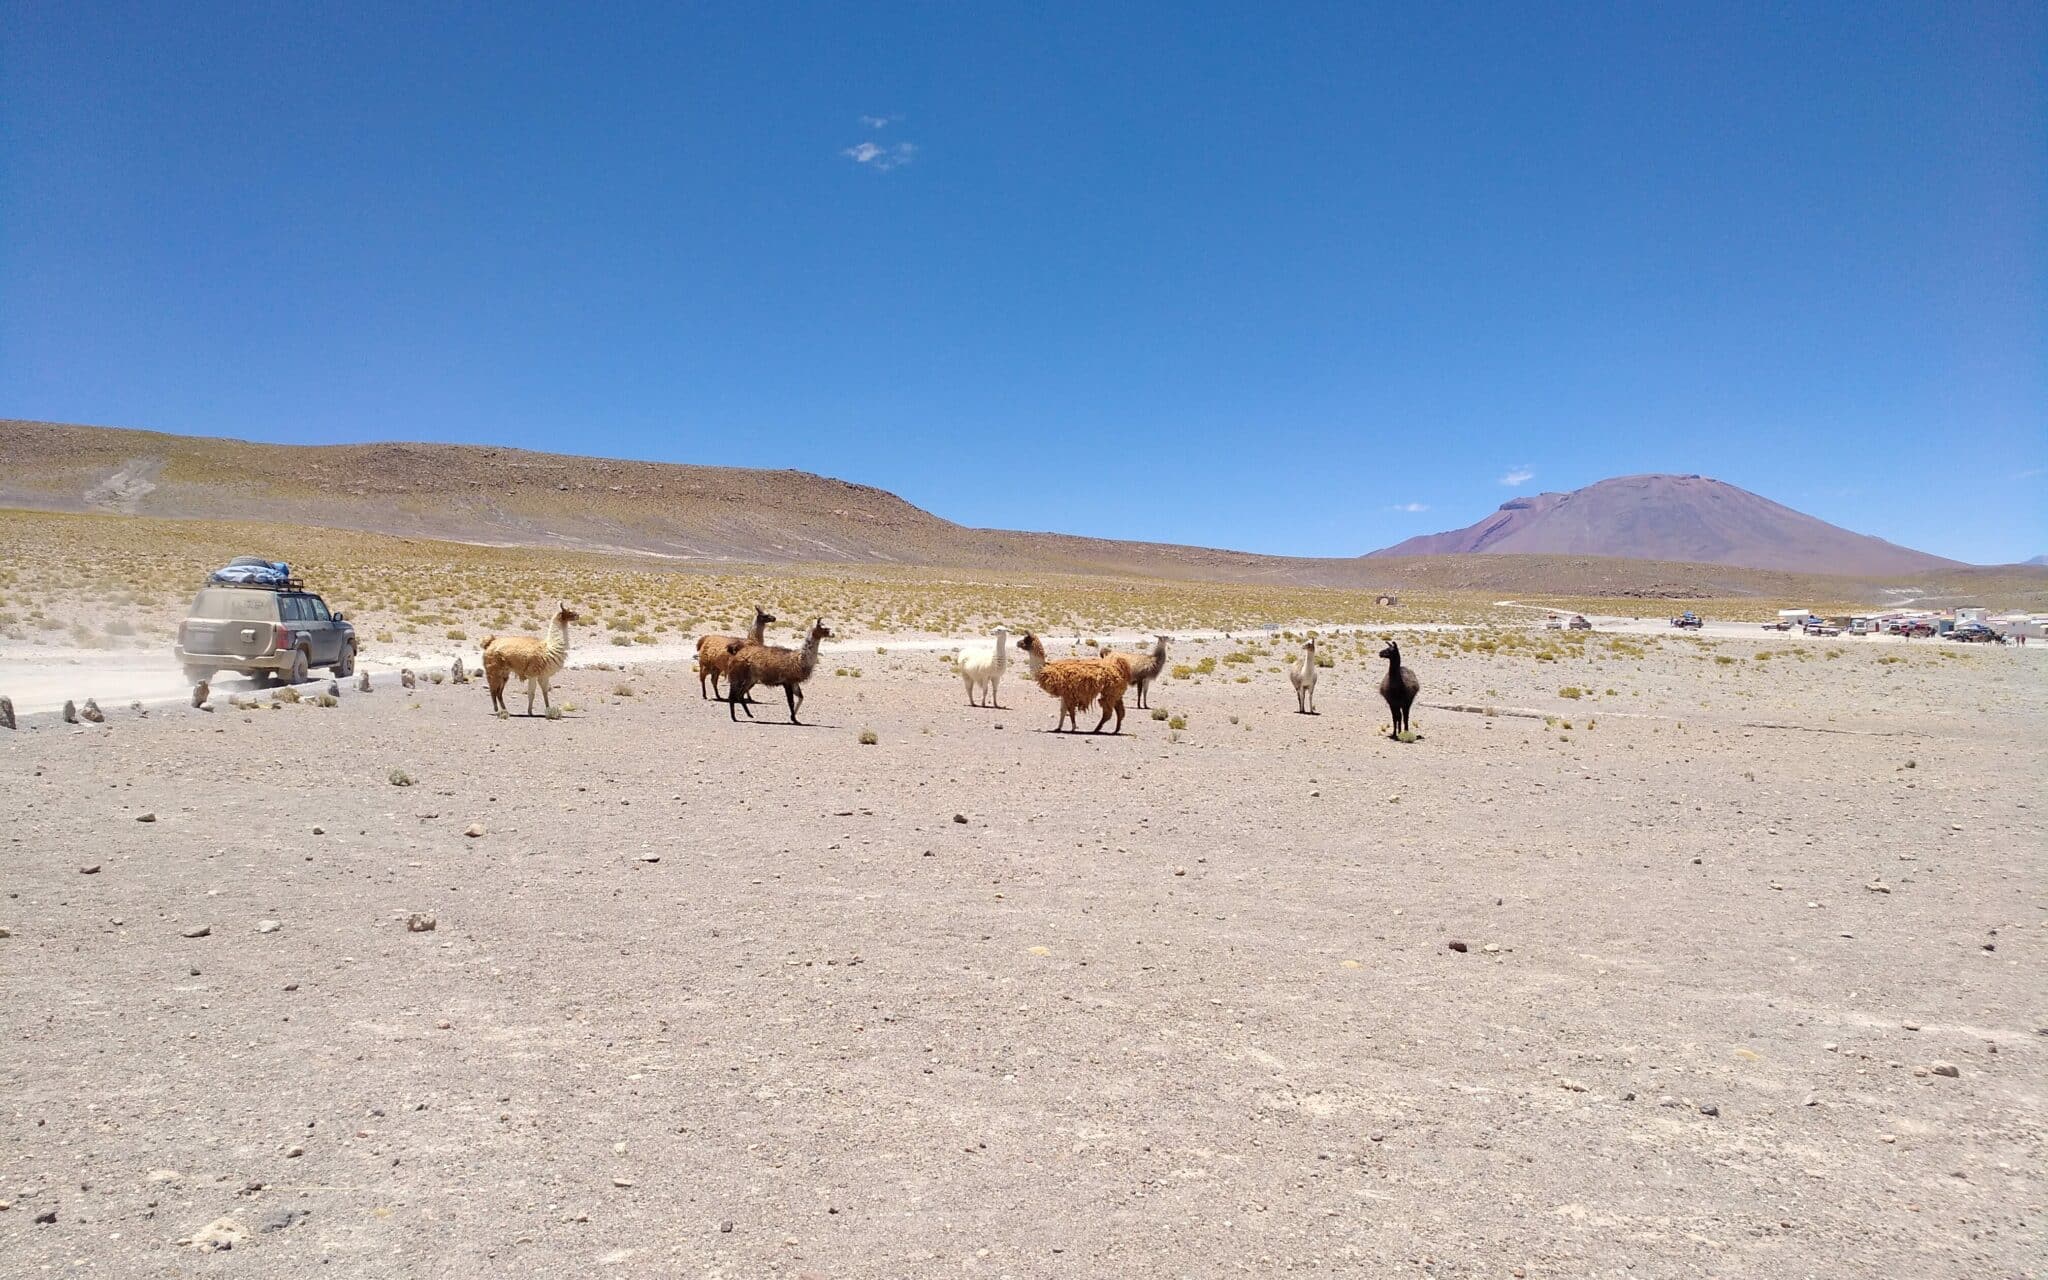 Llamas And Alpacas In The Middle Of A Dry Landscape, On A Gravel Road An Off Road Vehicle Passes.